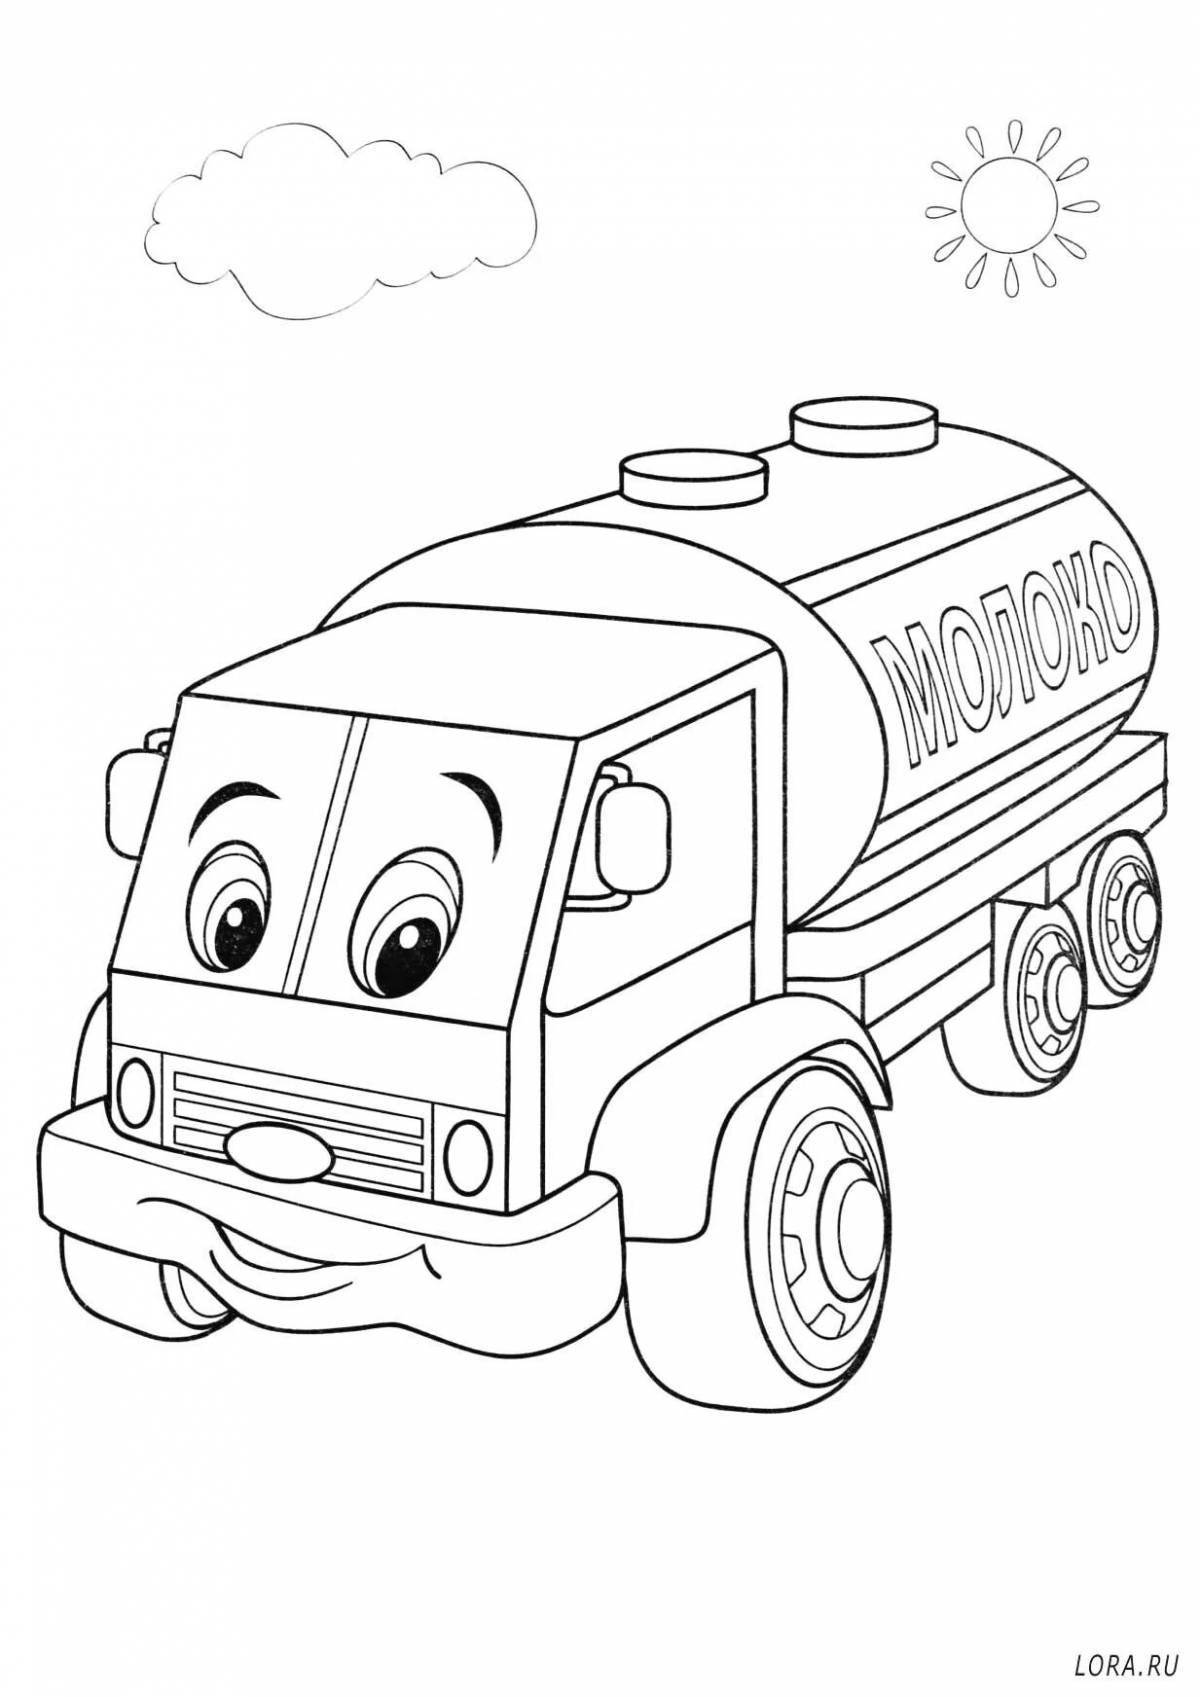 Creative water truck coloring book for kids